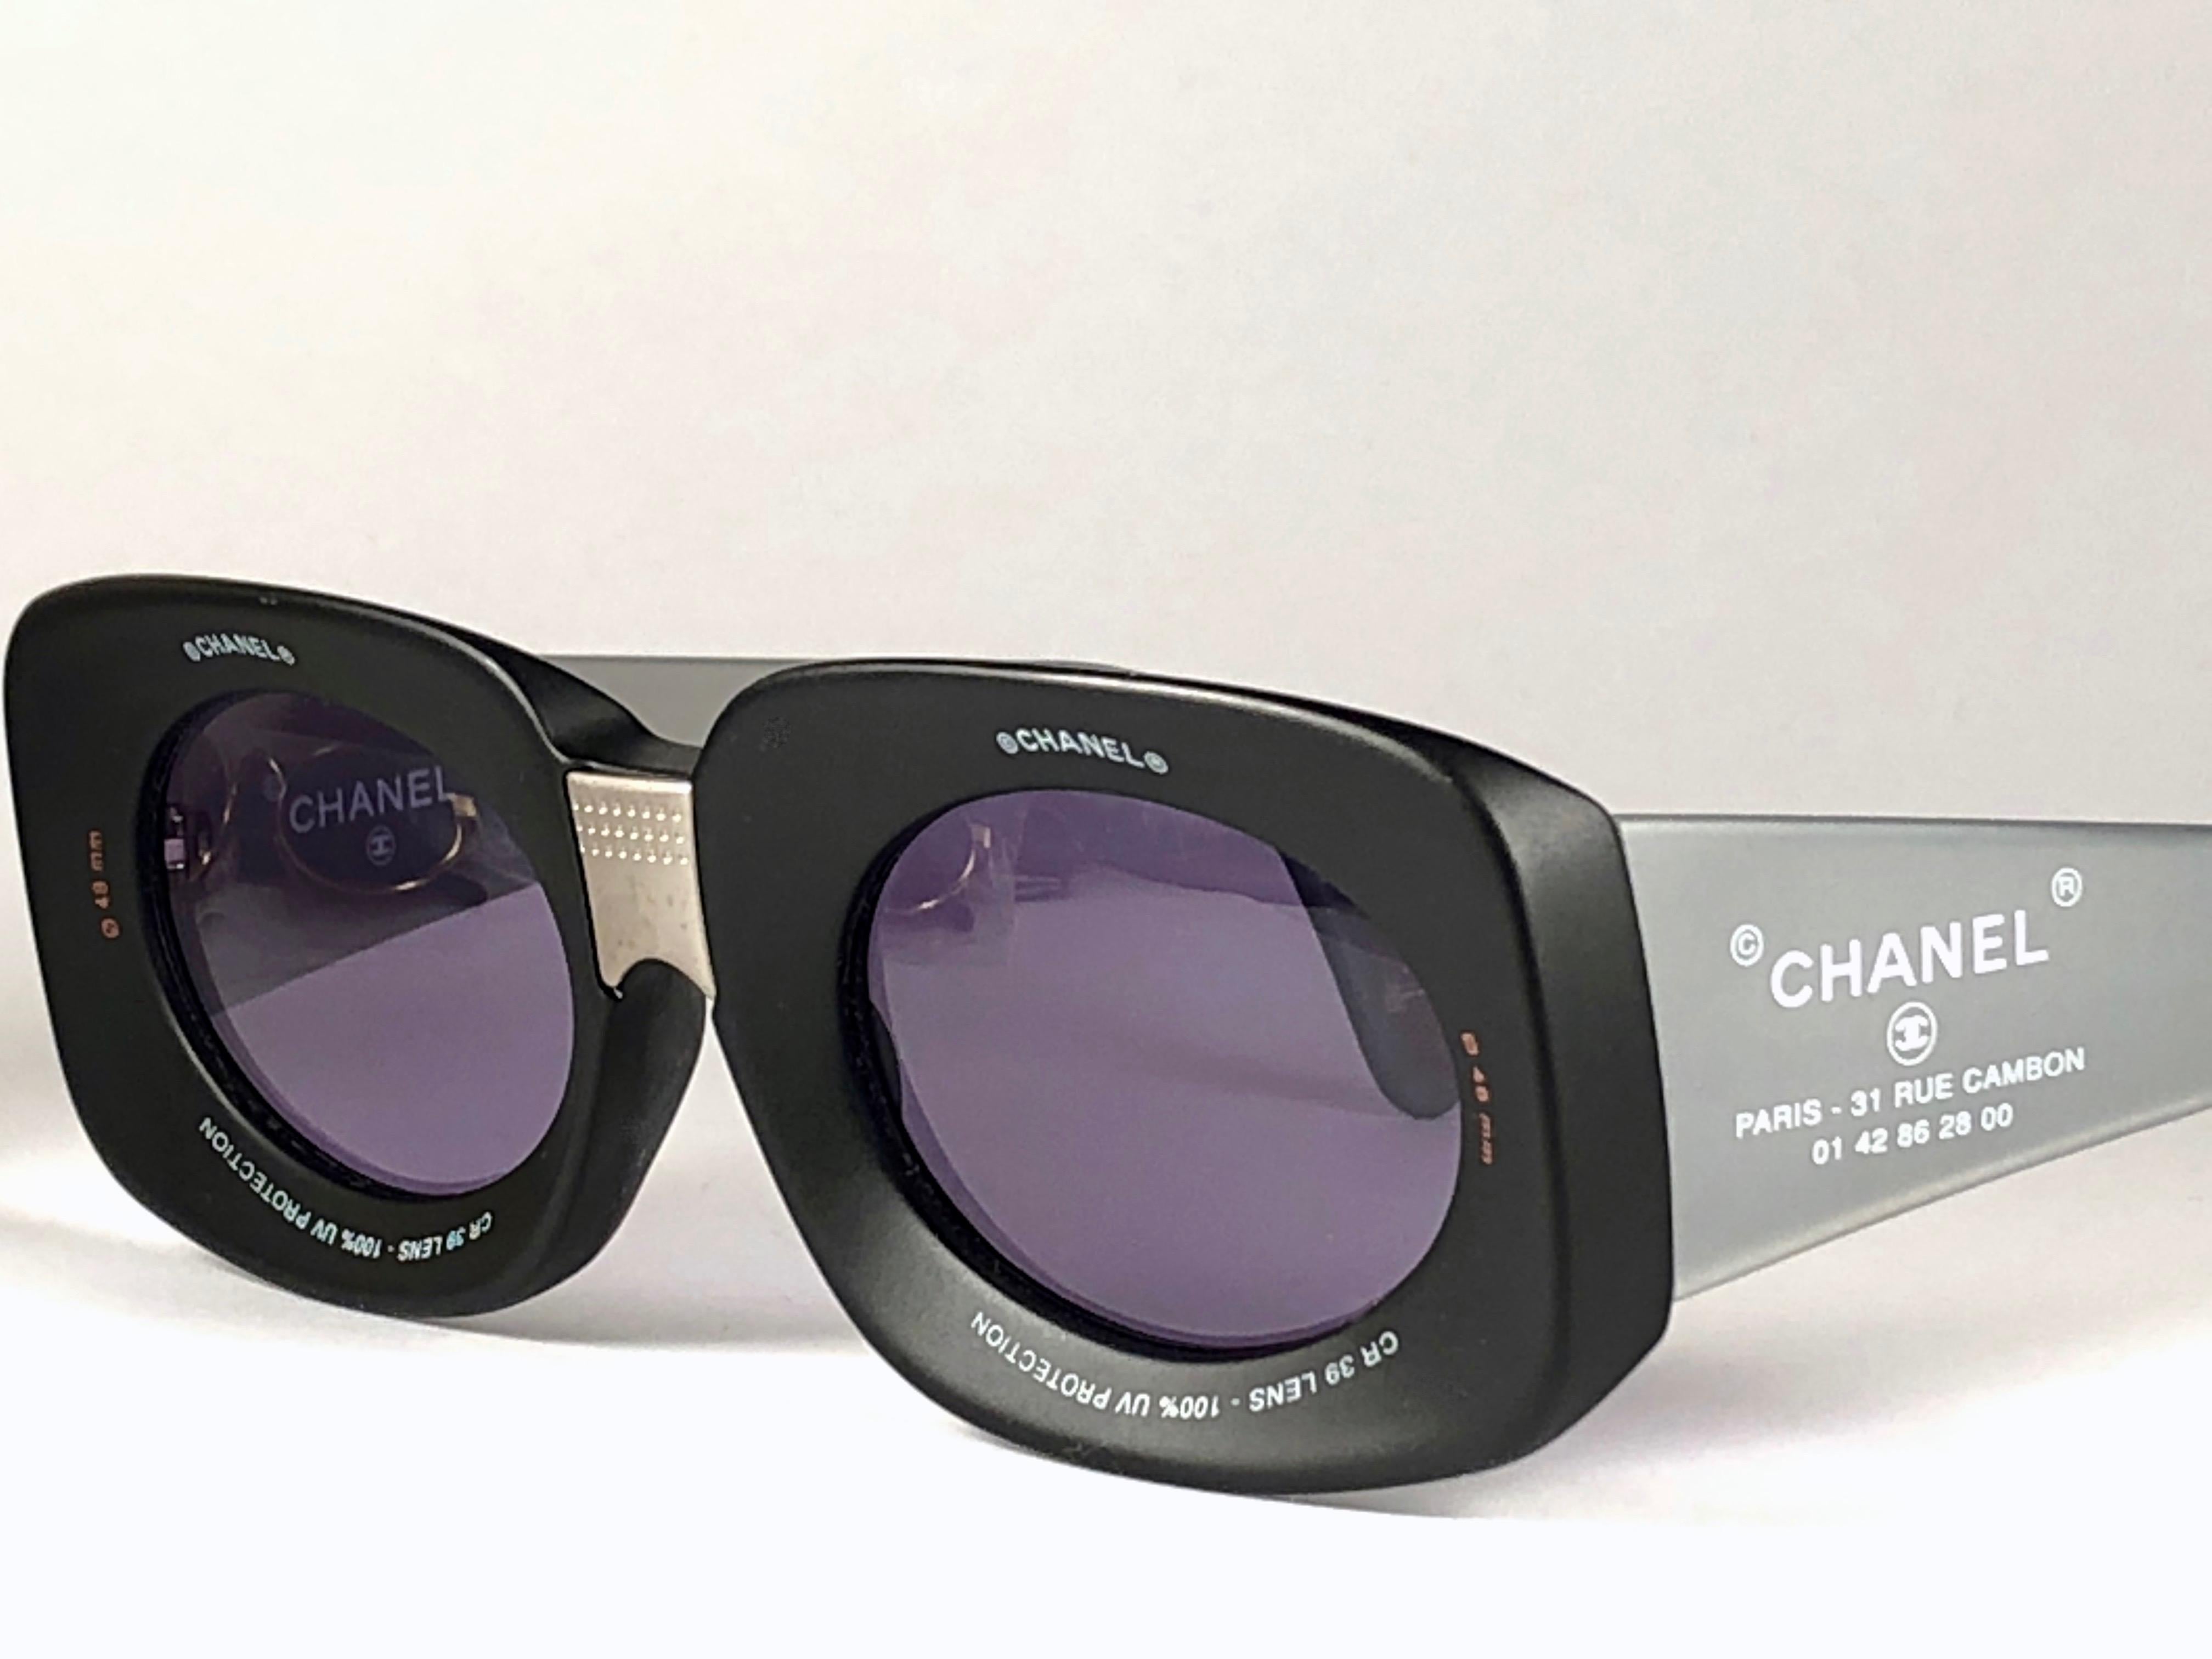 Chanel Vintage Camera Lens Black & Grey Sunglasses Made in Italy Collector Item 4